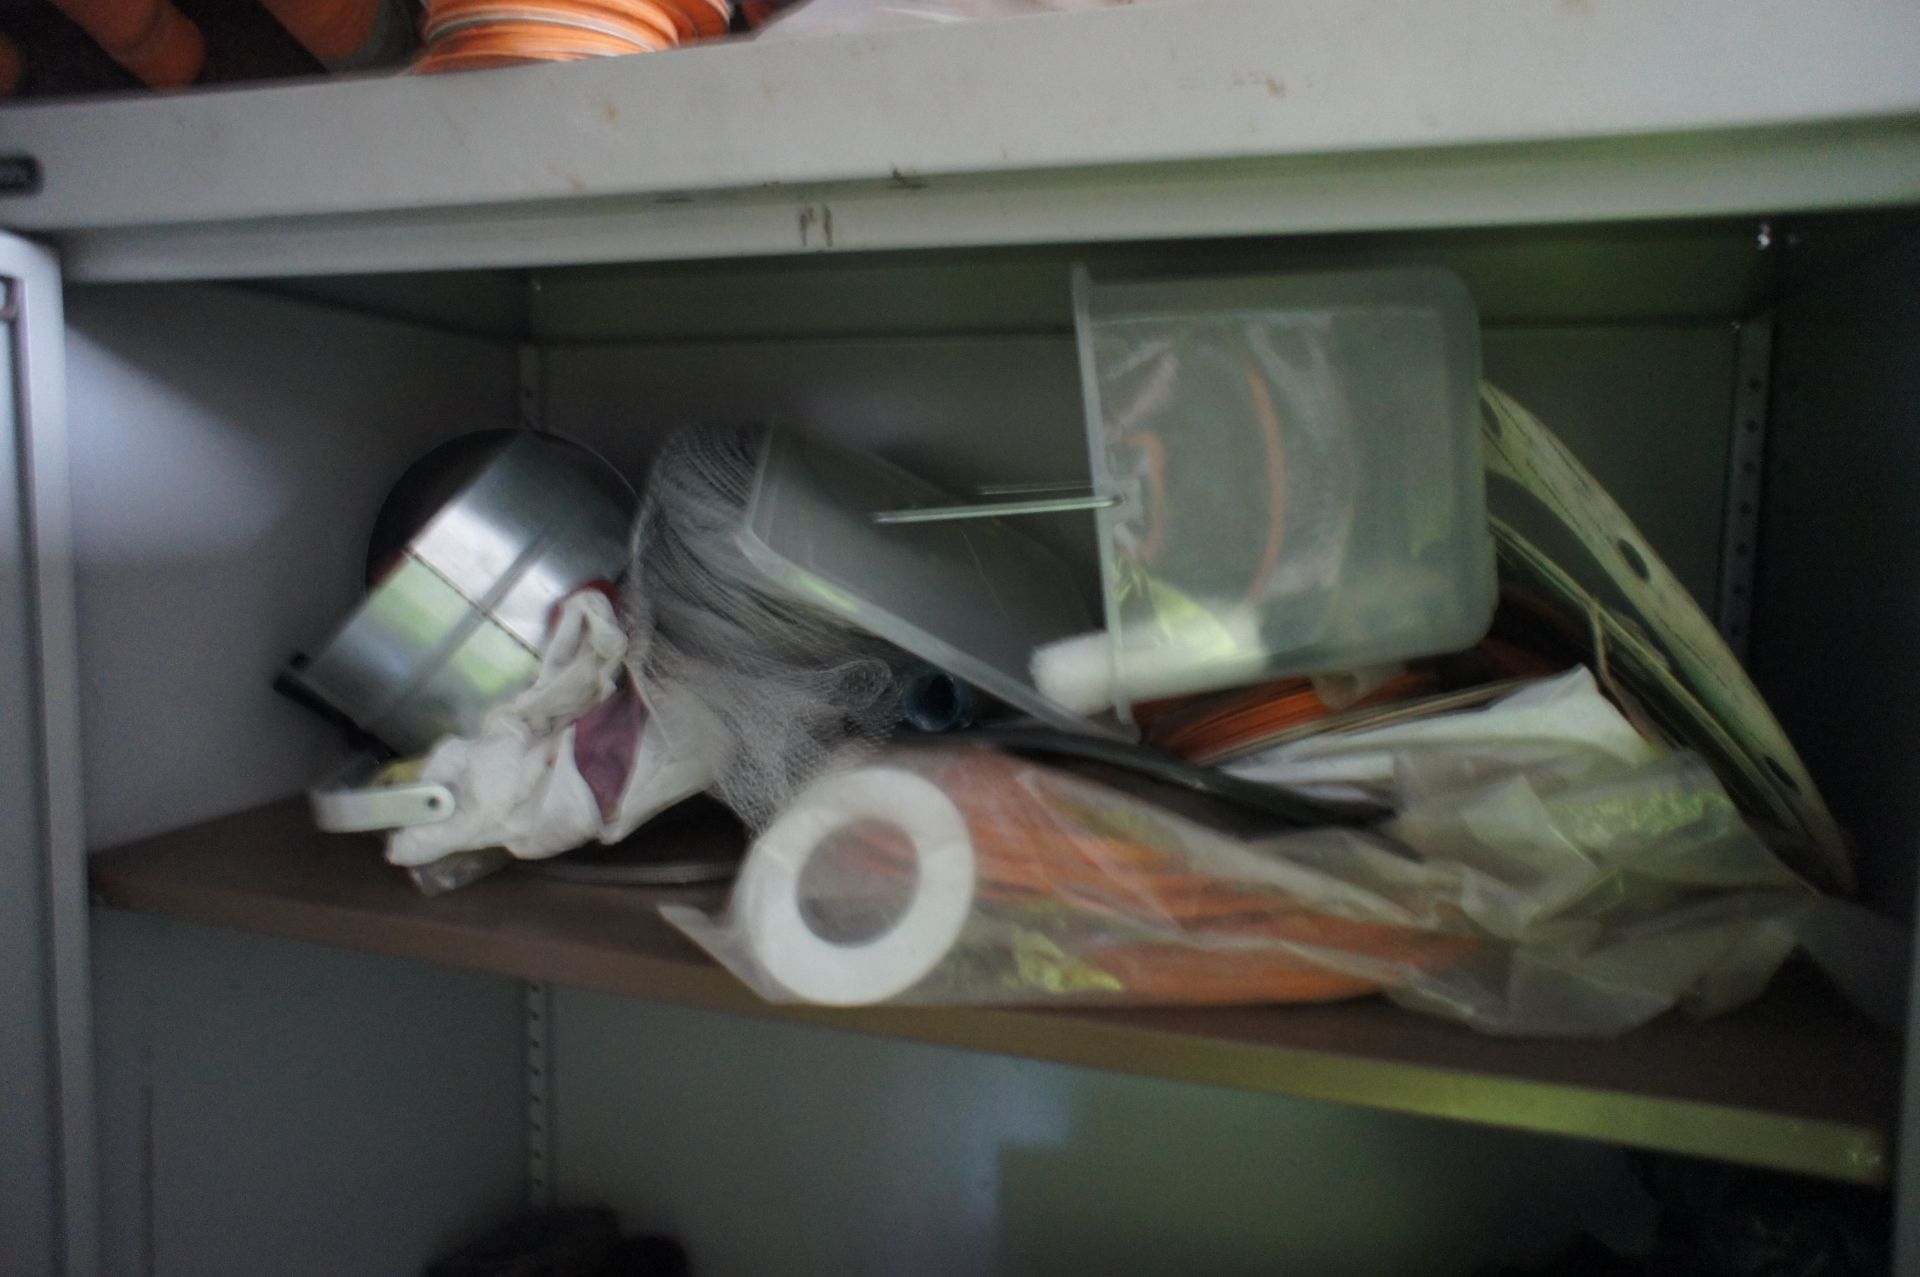 Cabinet & contents including ducting, gaskets etc. - Image 2 of 3